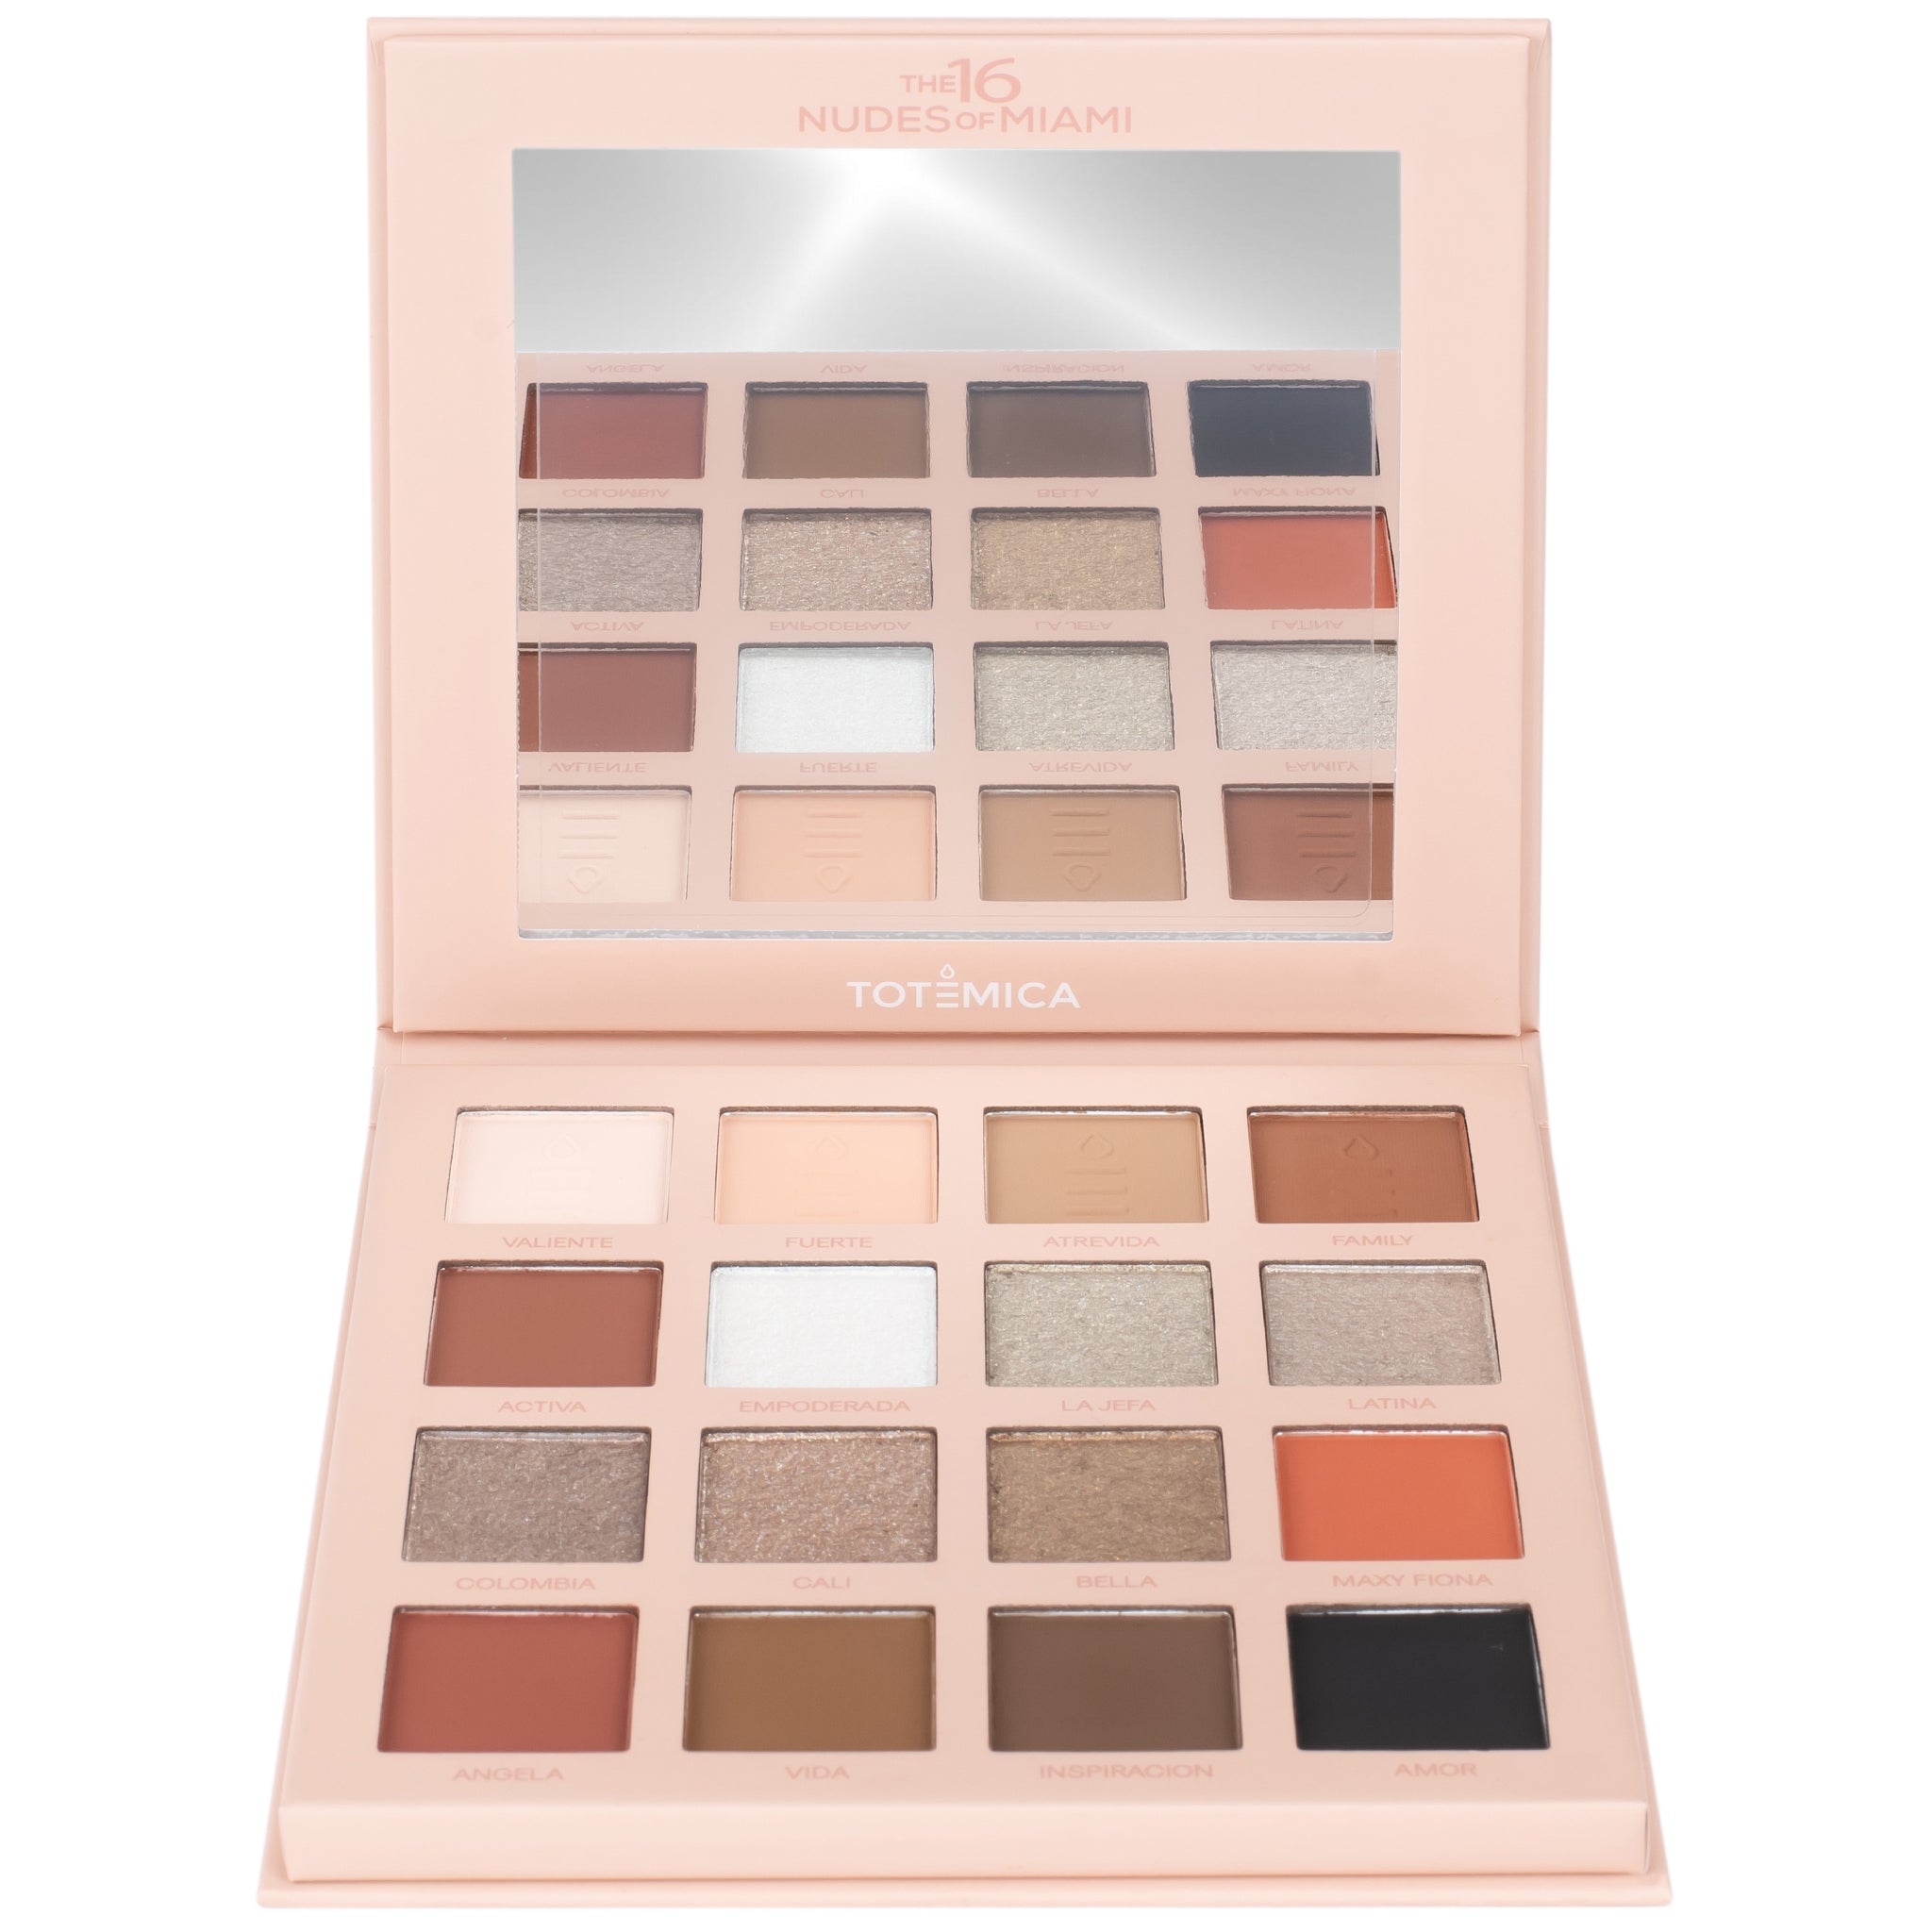 Palette | Wholesale Totemica Miami 16 Nudes Of - Makeup The